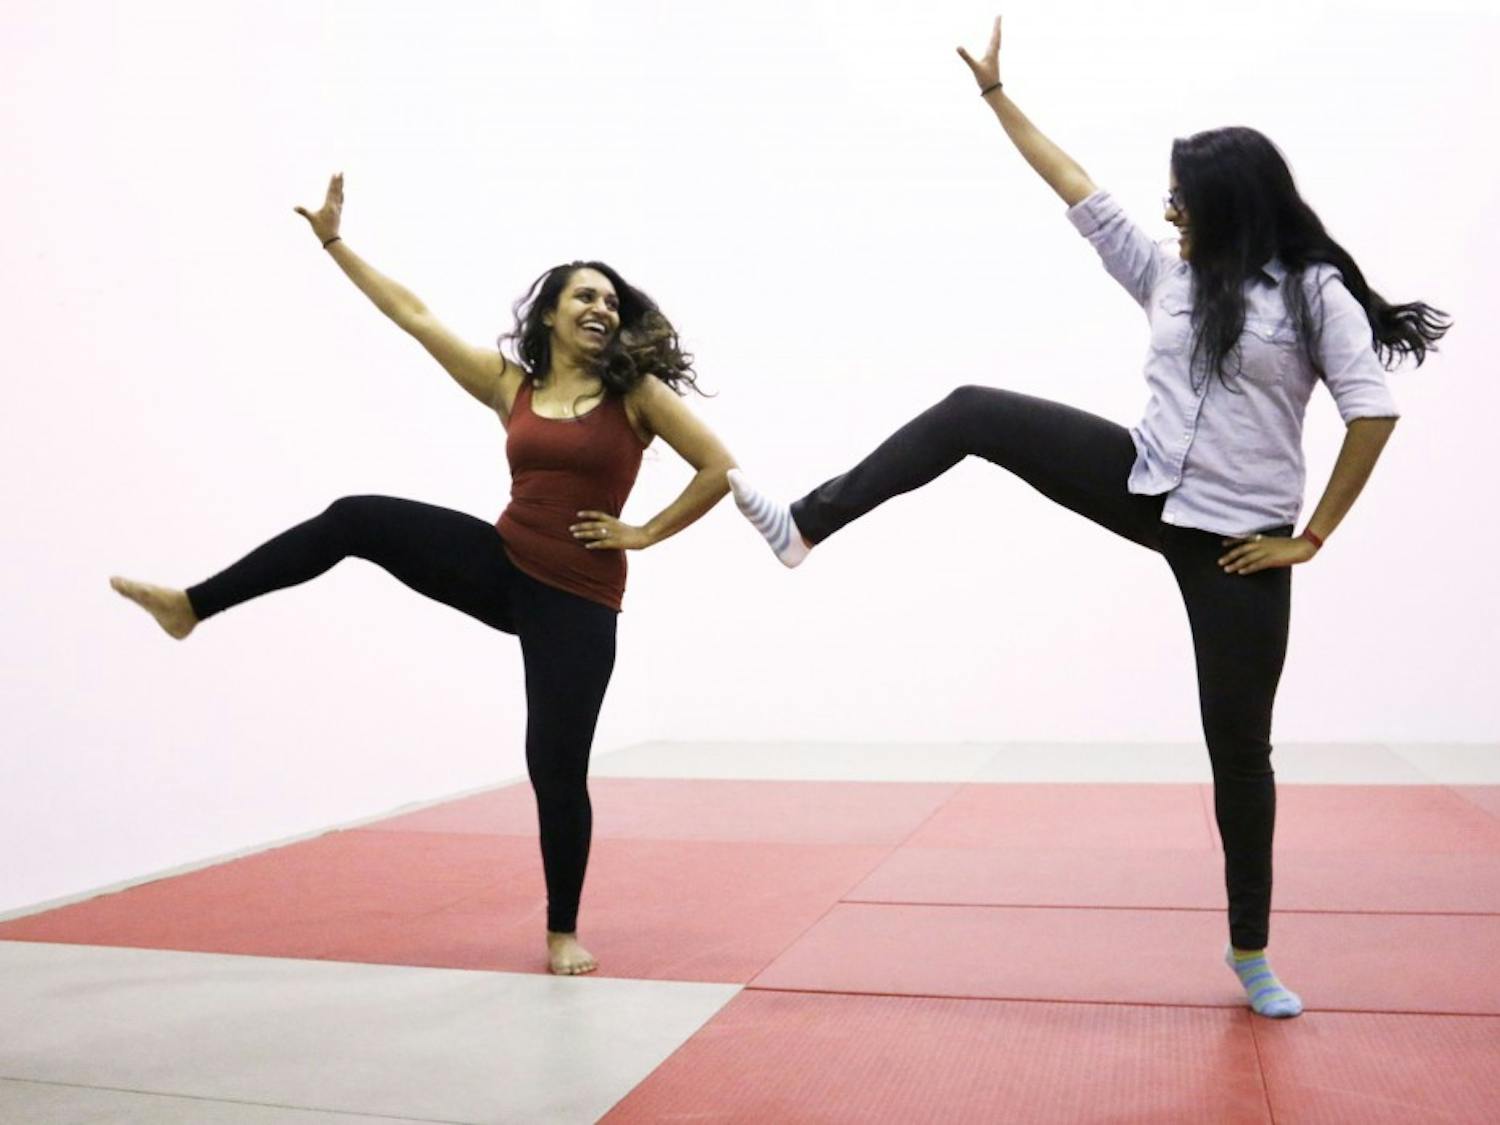 Kanak Jha, broacast journalism senior, and Bhavna Ramesh, biomedical engineering sophomore, practice their Bollywood dance at the Sun Devil Fitness Center on Monday Oct. 24, 2016. 